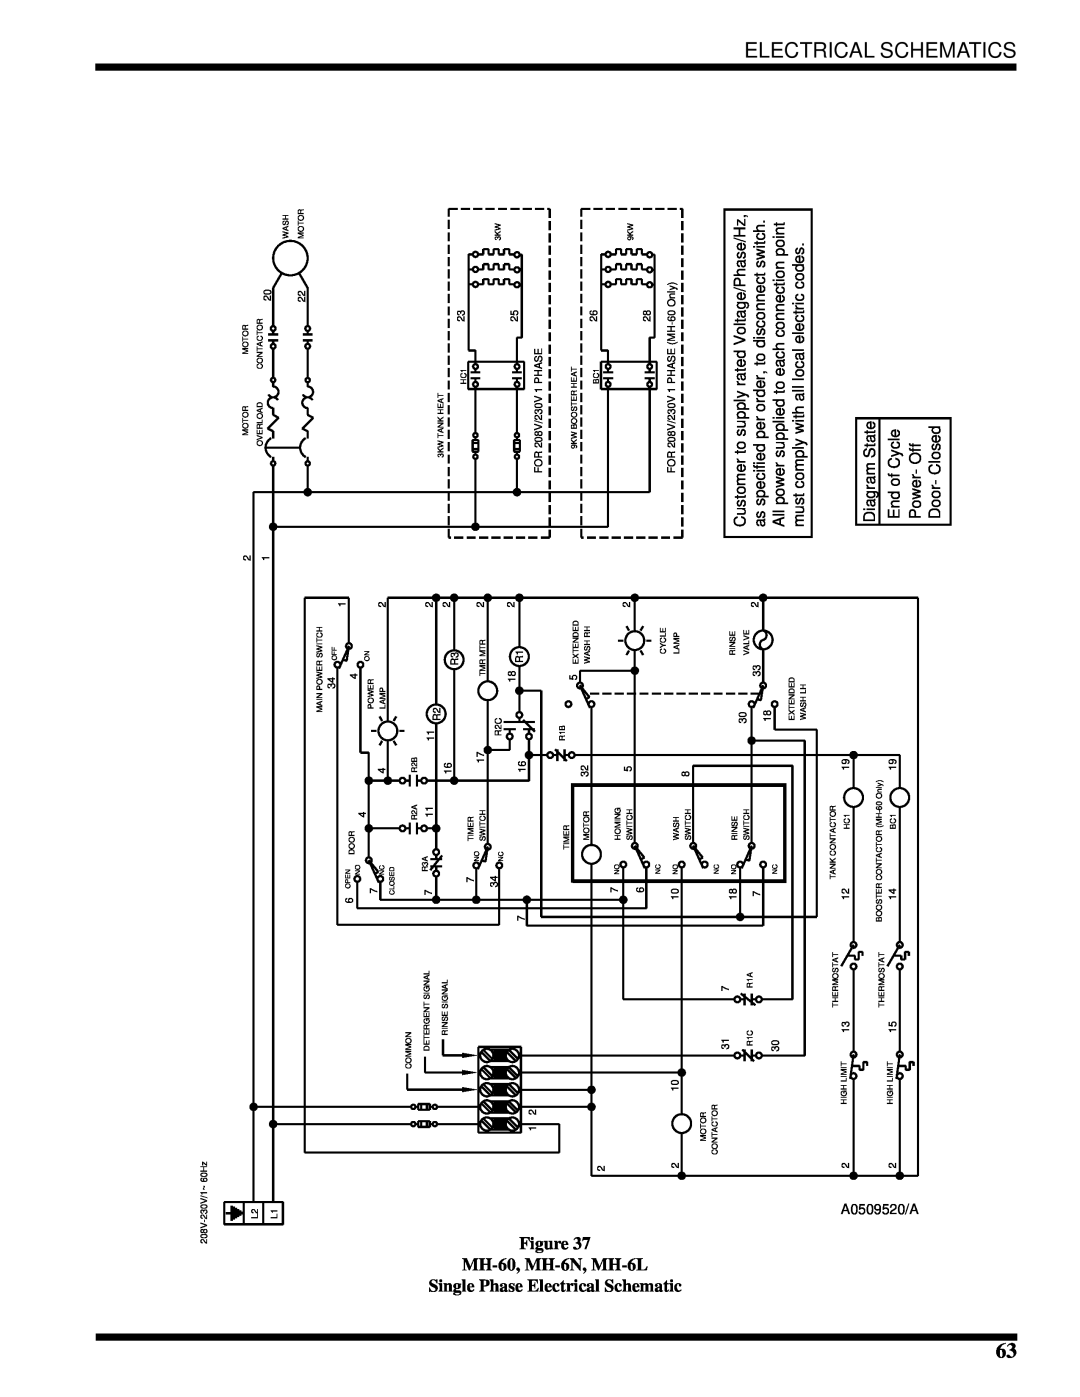 Moyer Diebel MH-6LM2, MH-6NM2, MH-60M2 Diagram State End of Cycle Power- Off Door- Closed, Single PhaseElectricalSchematic 